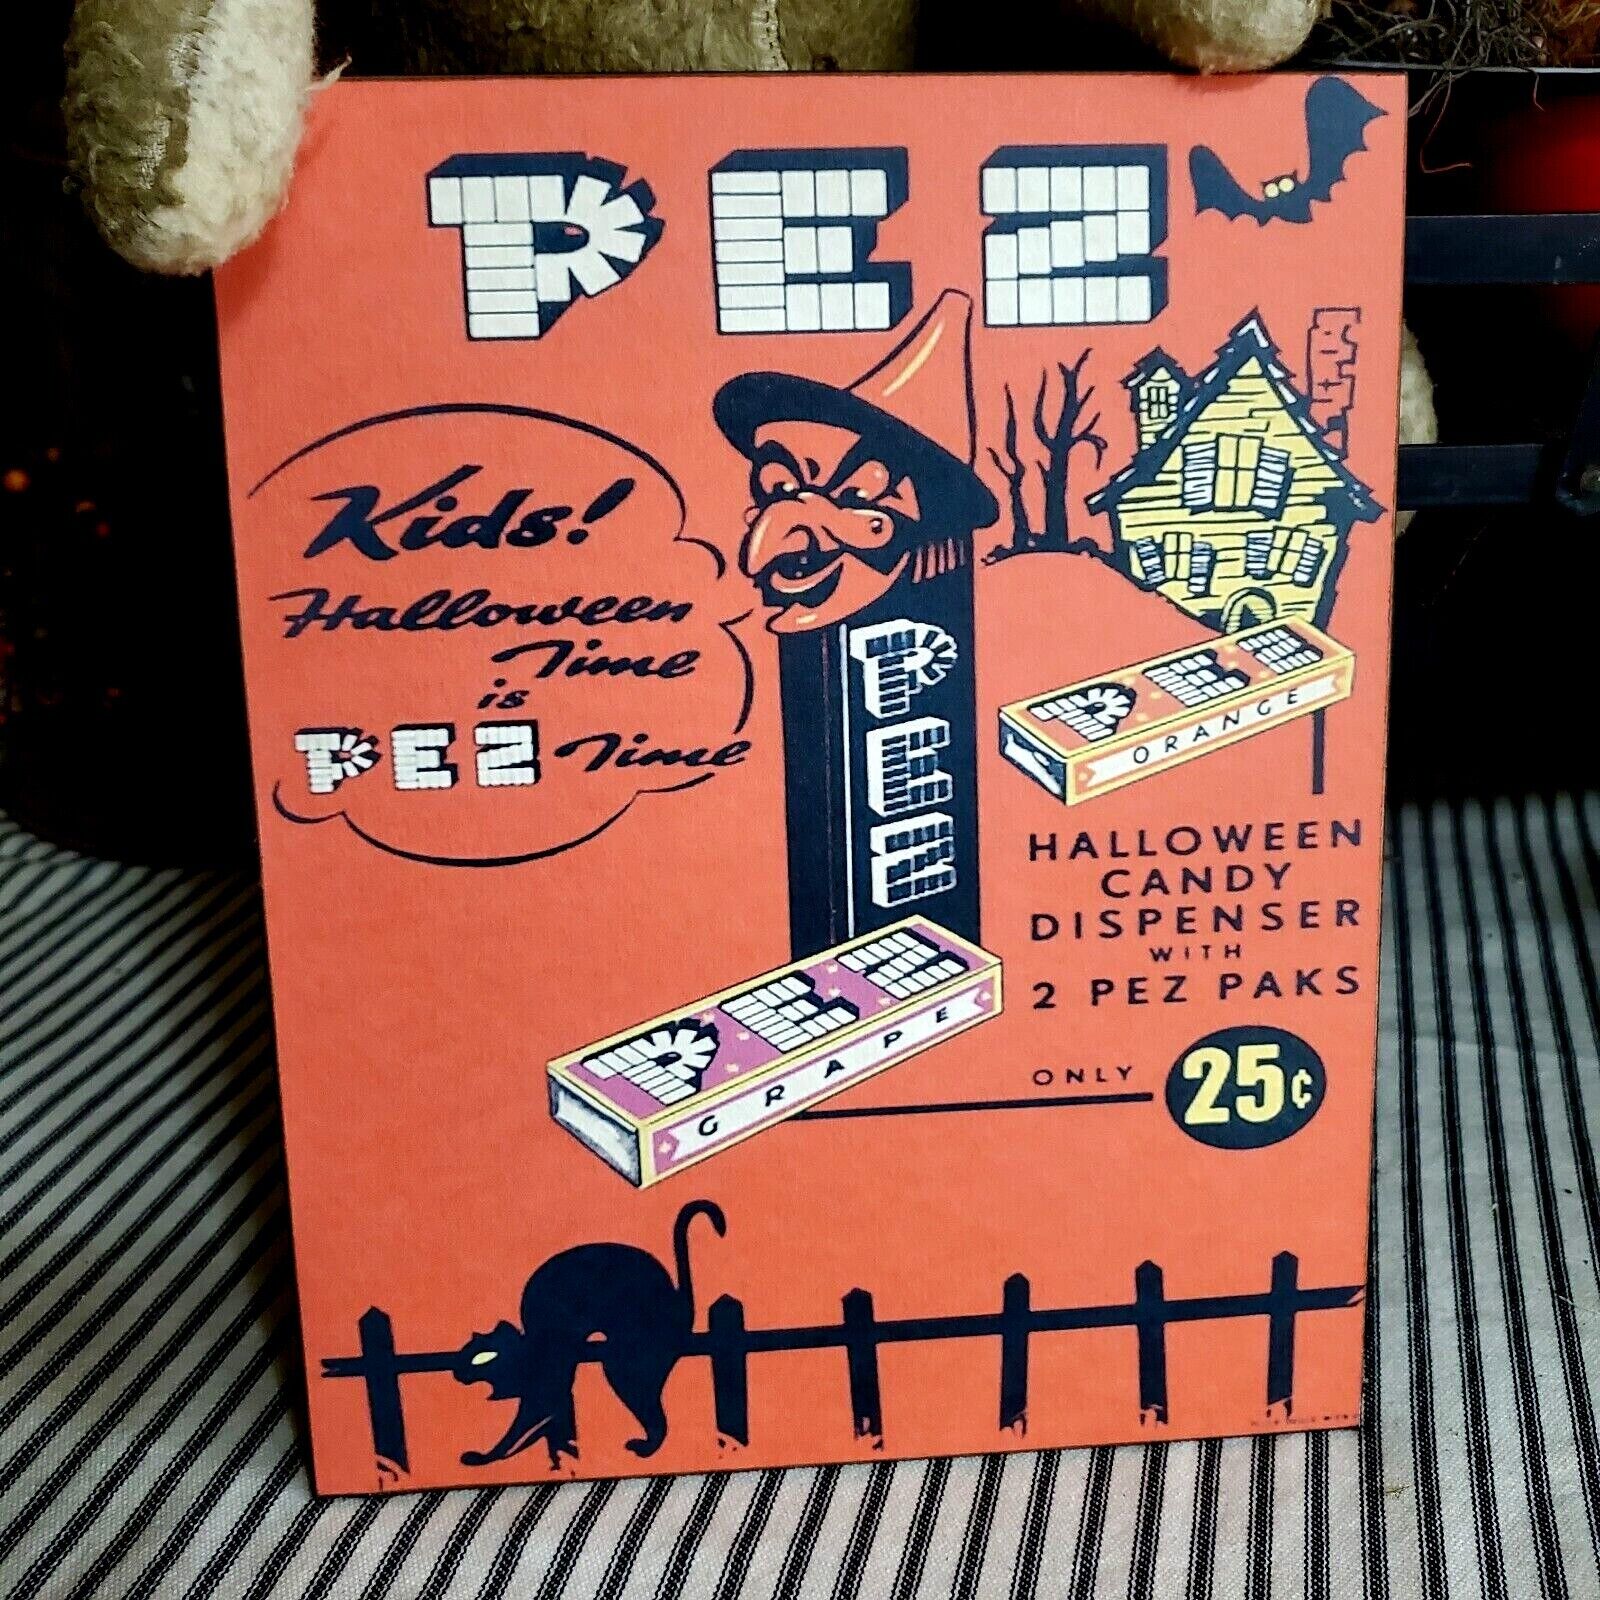 VINTAGE RETRO MODERN STYLE HALLOWEEN WITCH PEZ ADVERTISING 25 CENTS SIGN CANVAS 